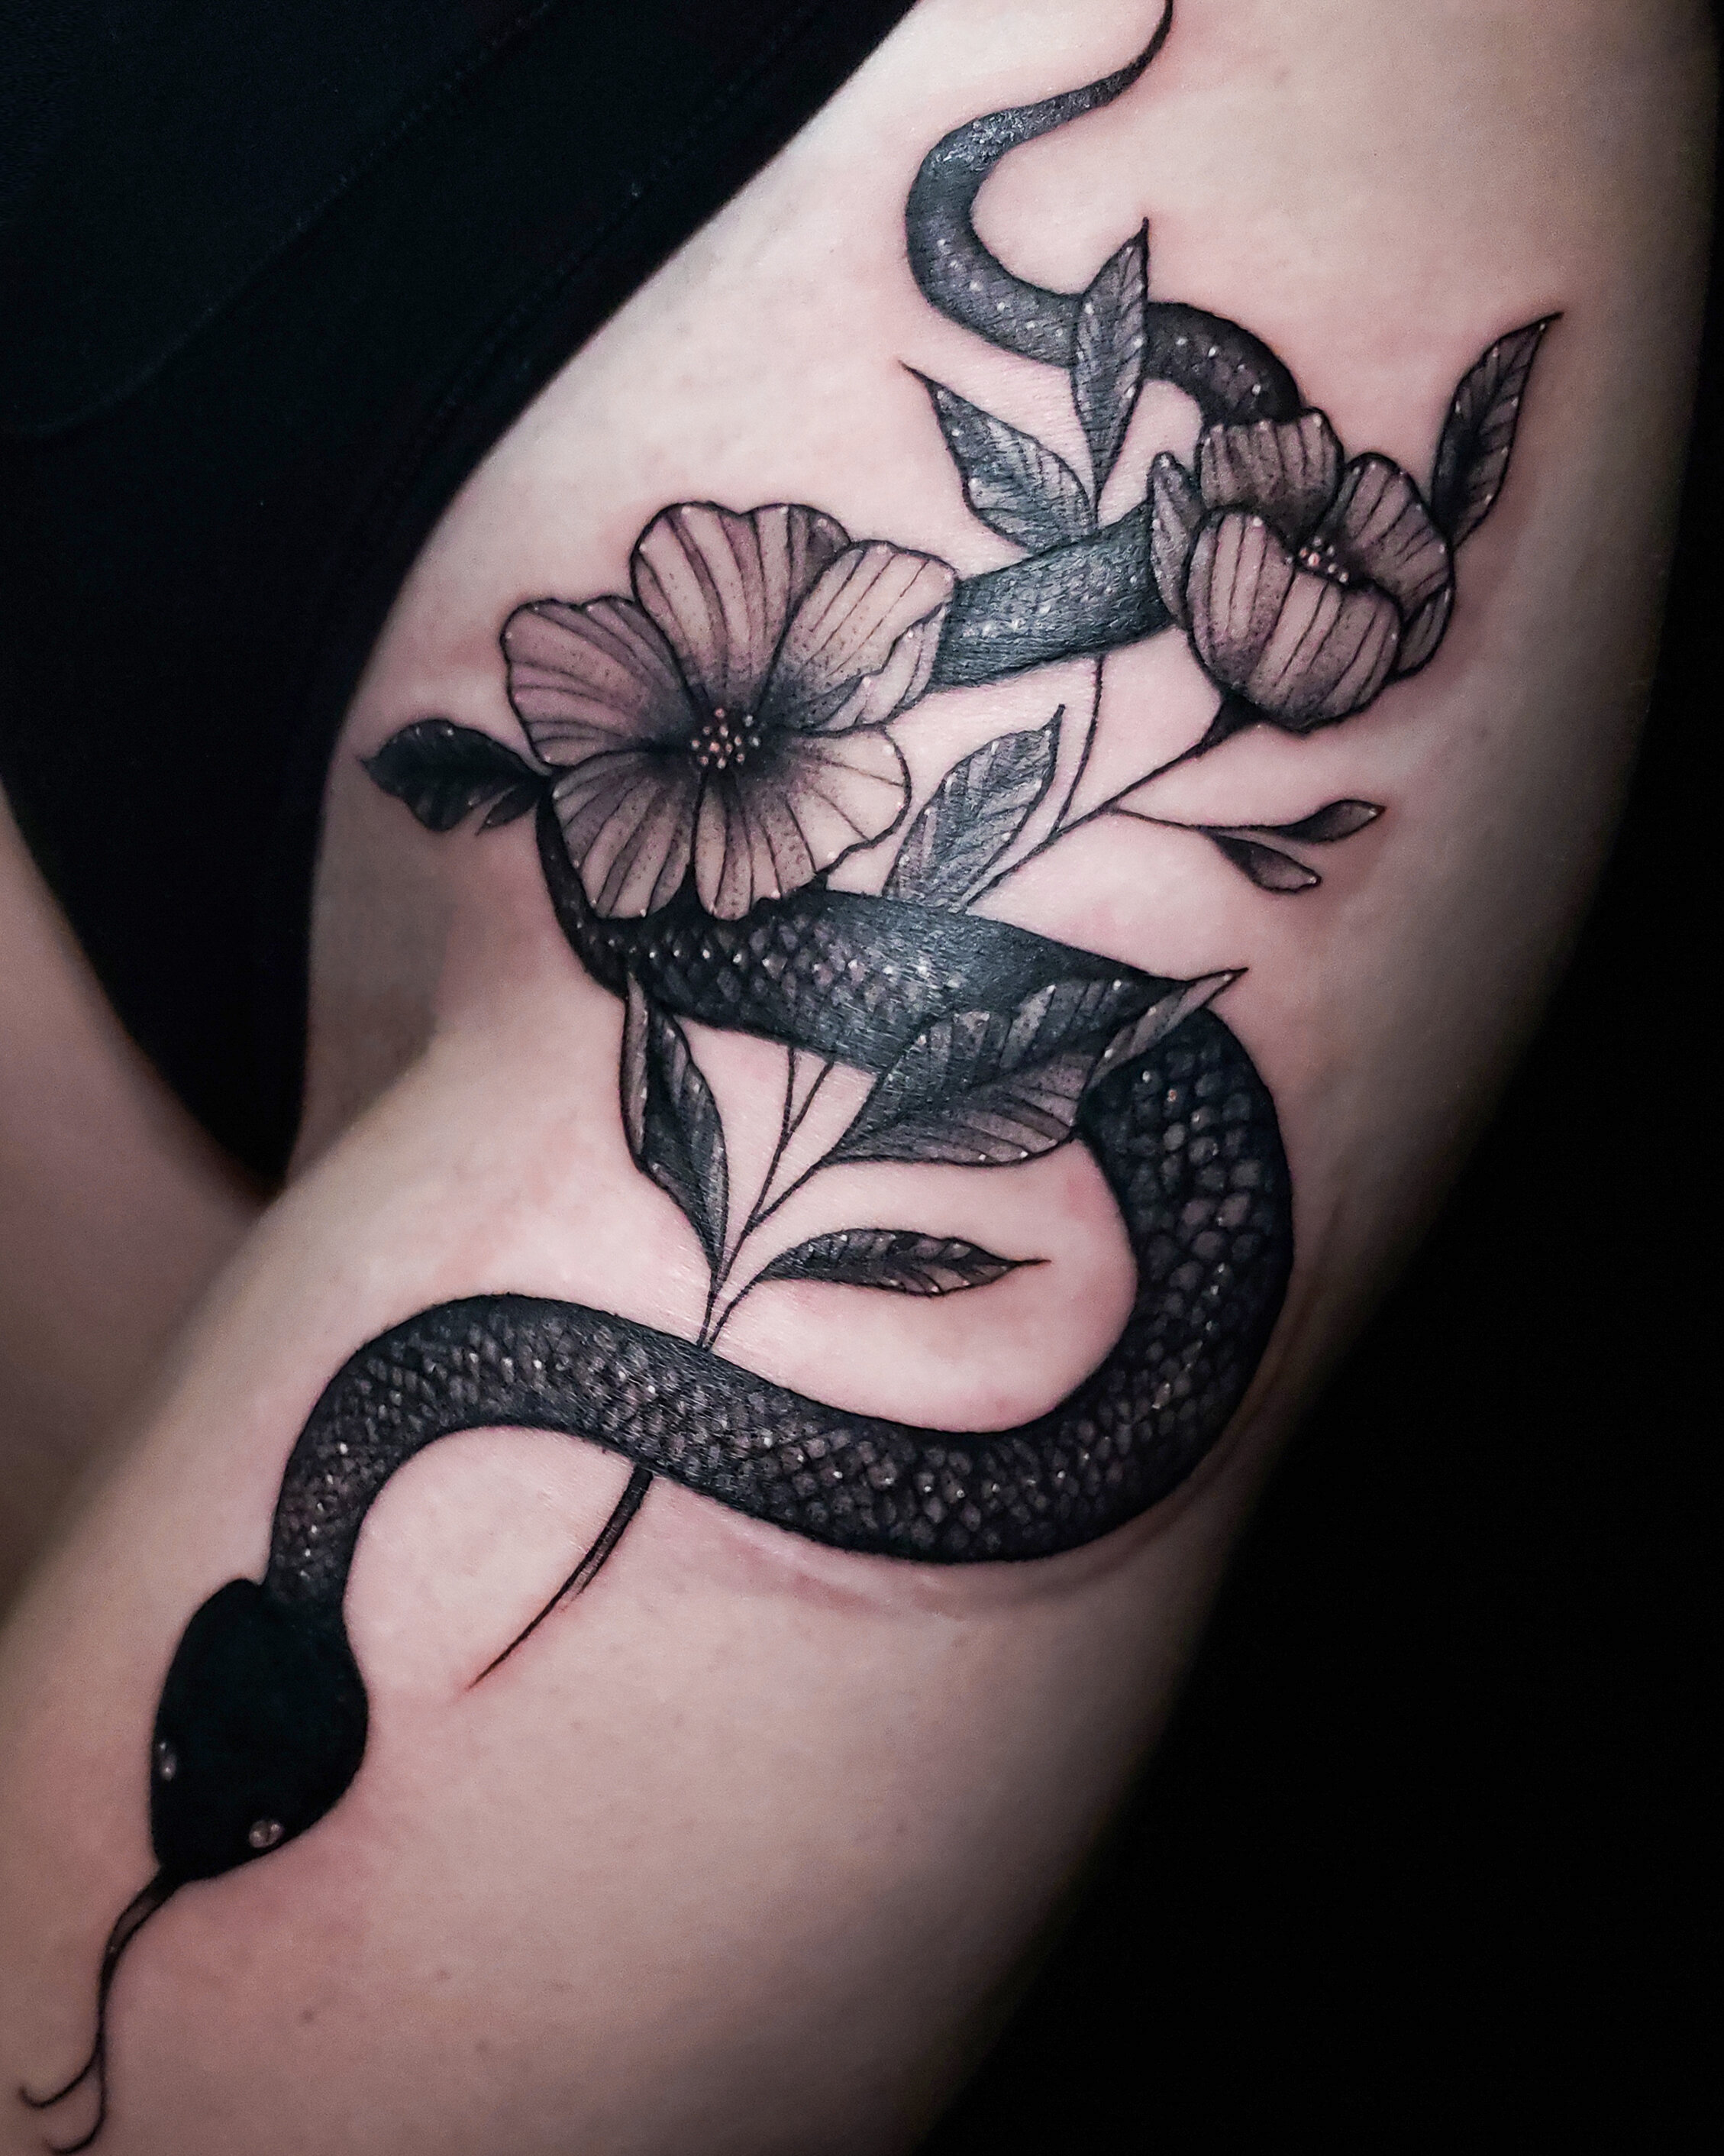 Deadly nightshade and blackberries for Rowen  theburtontattoocollective  leicestertattoo floral floraltattoo dotwork   Tattoos Floral tattoo Flower  tattoo